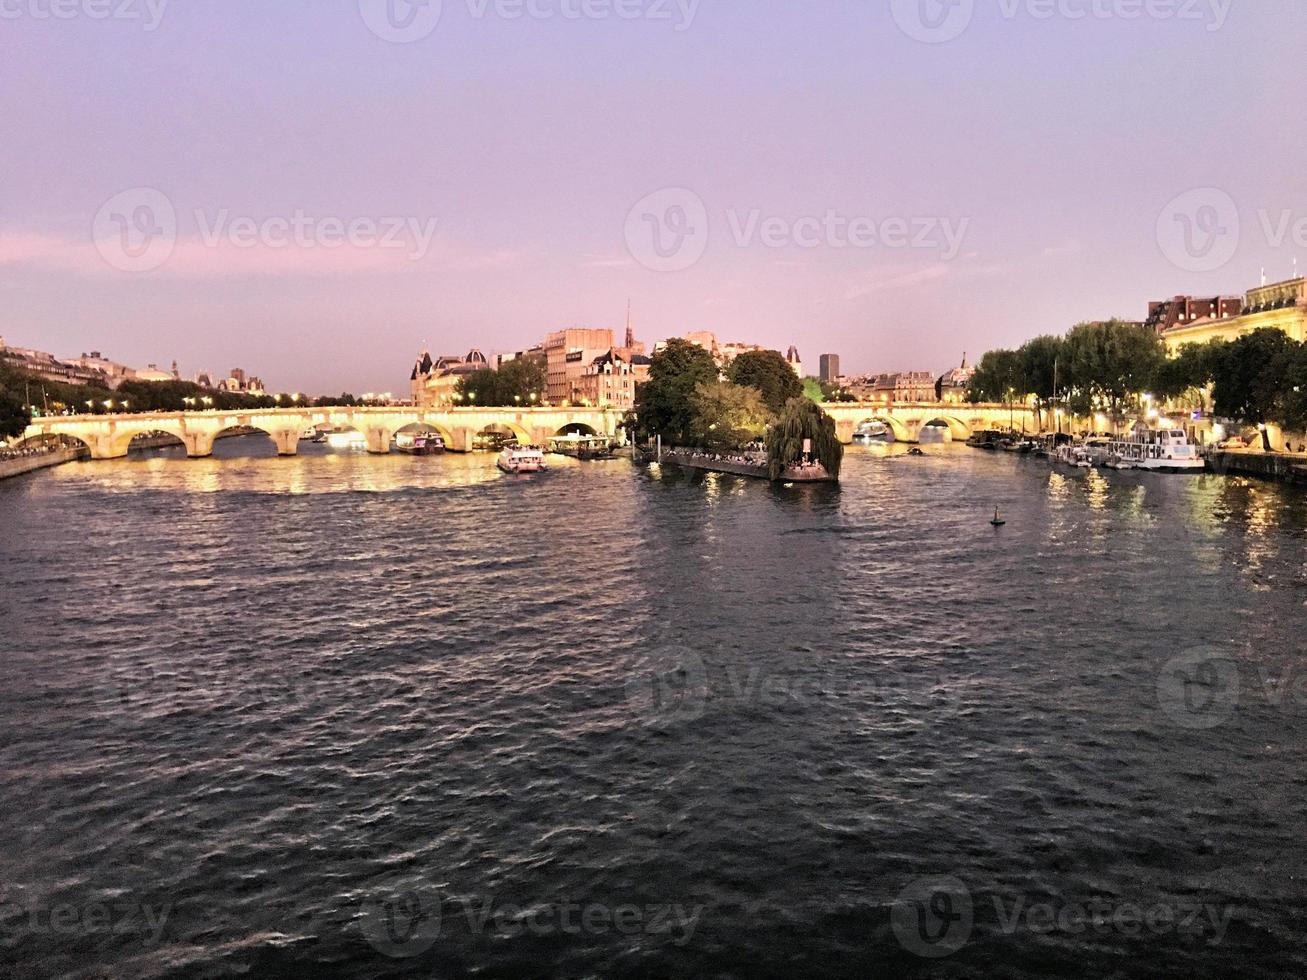 A panoramic view of Paris in the summer photo